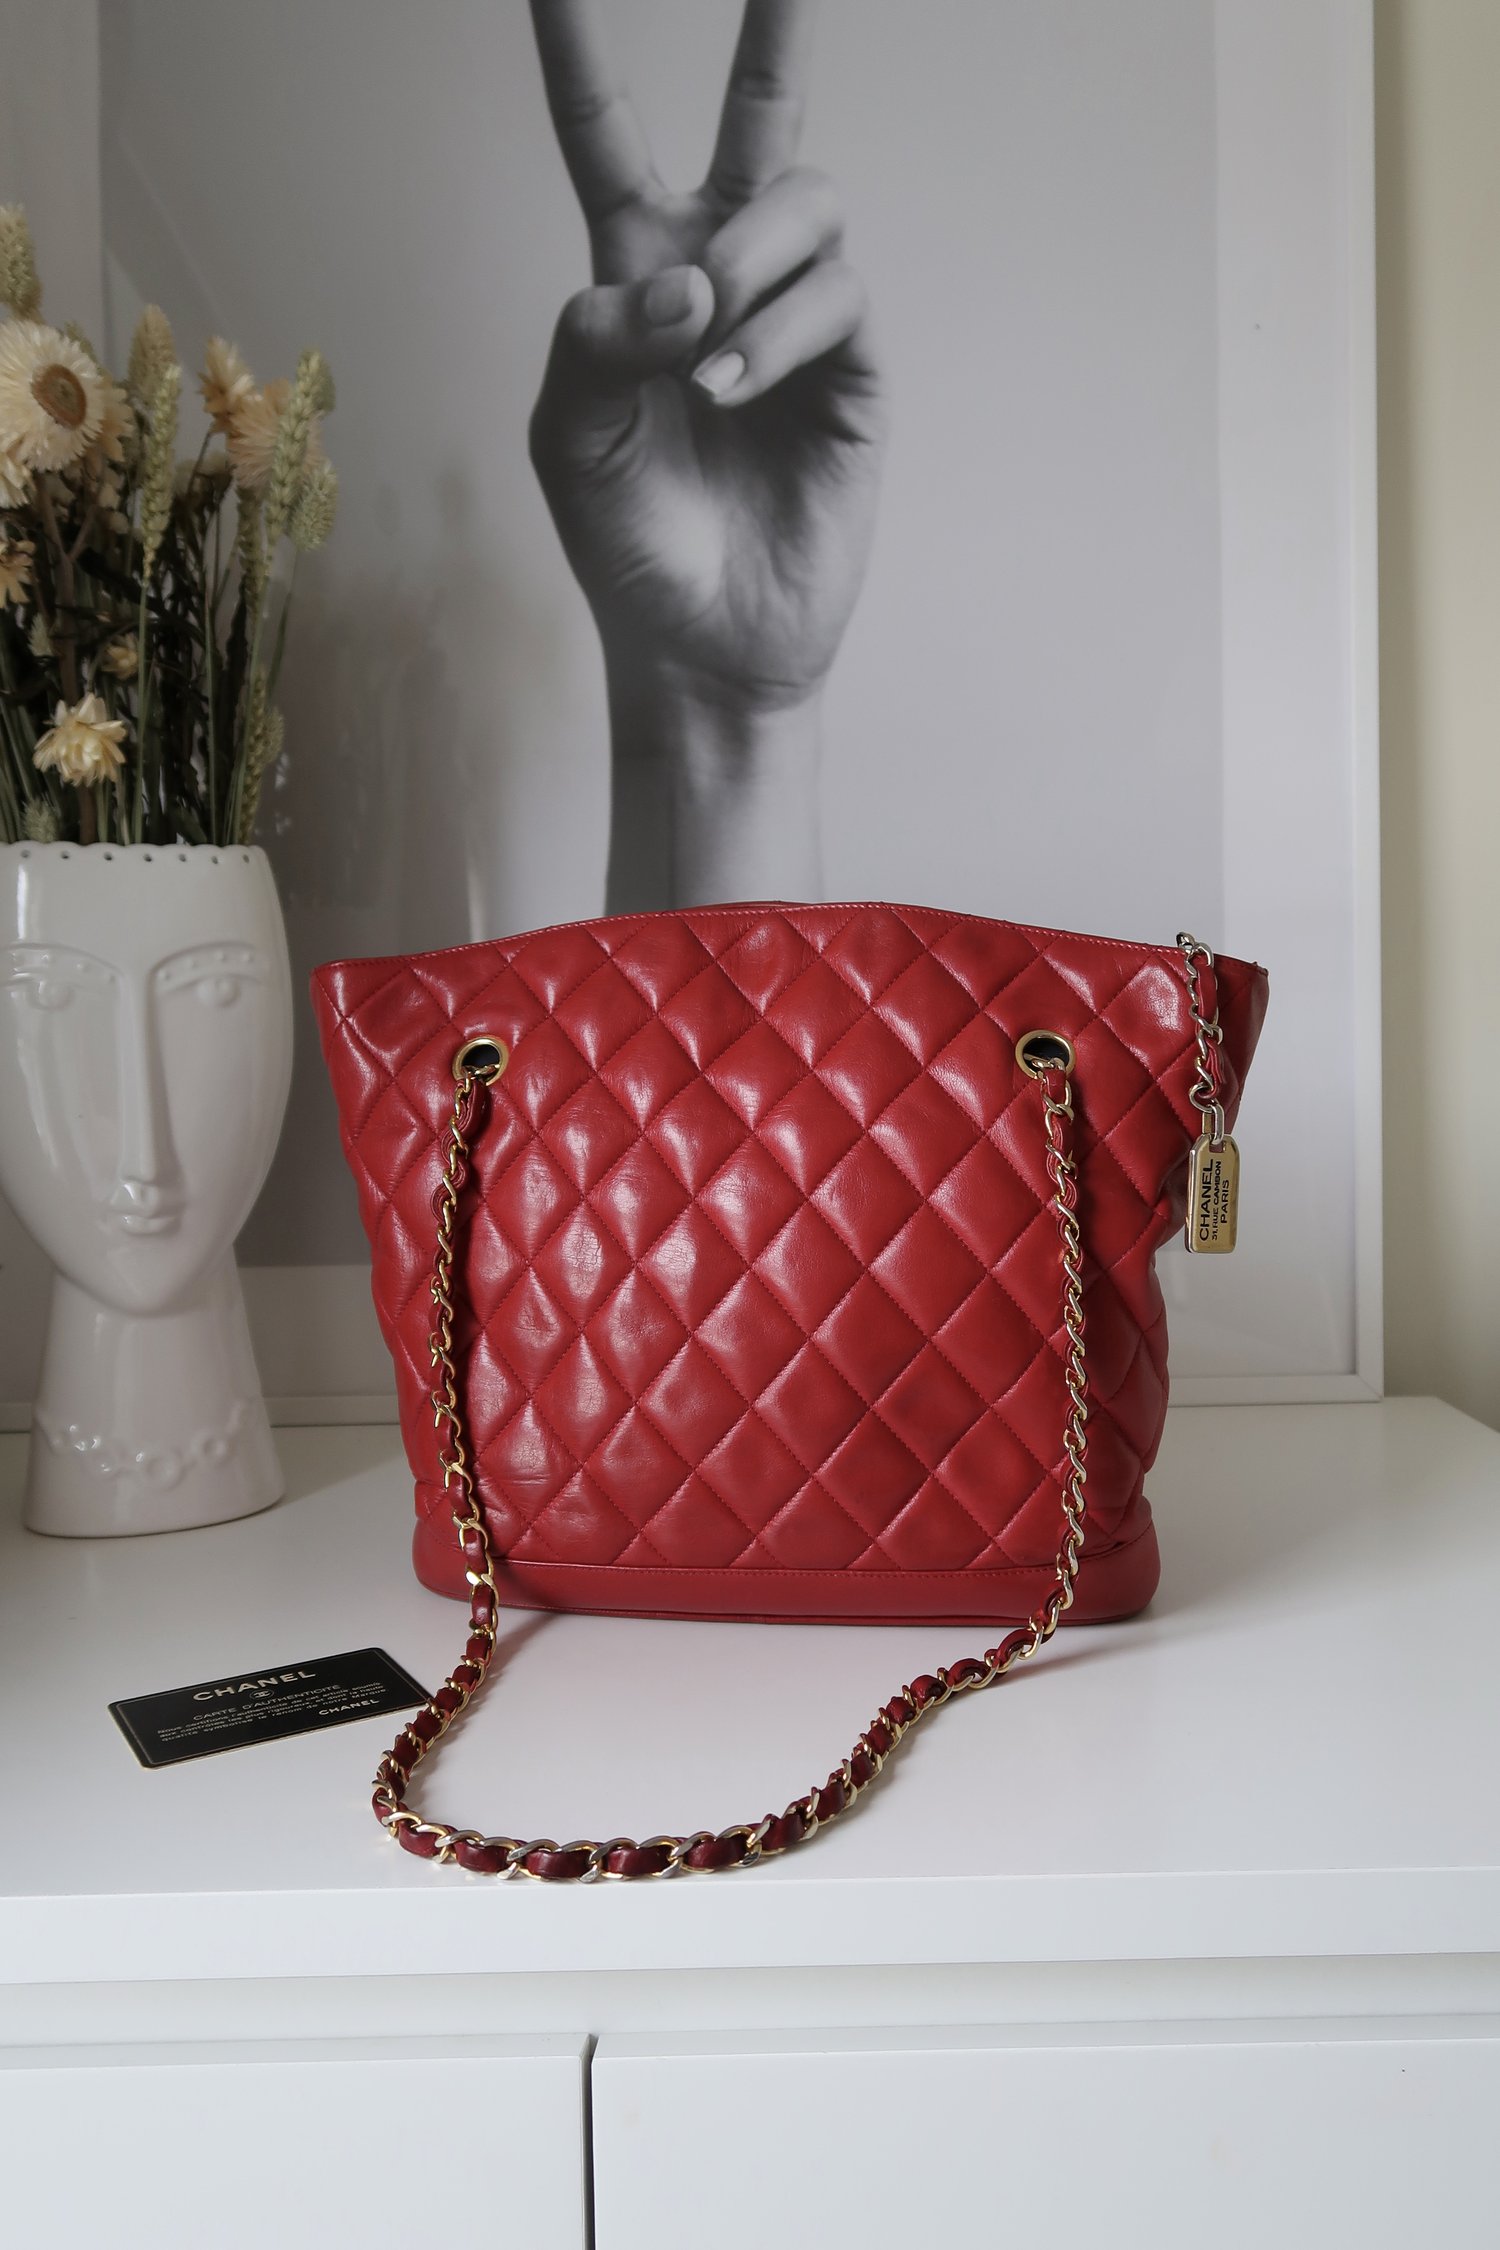 Chanel bag  89 for sale in Ireland 